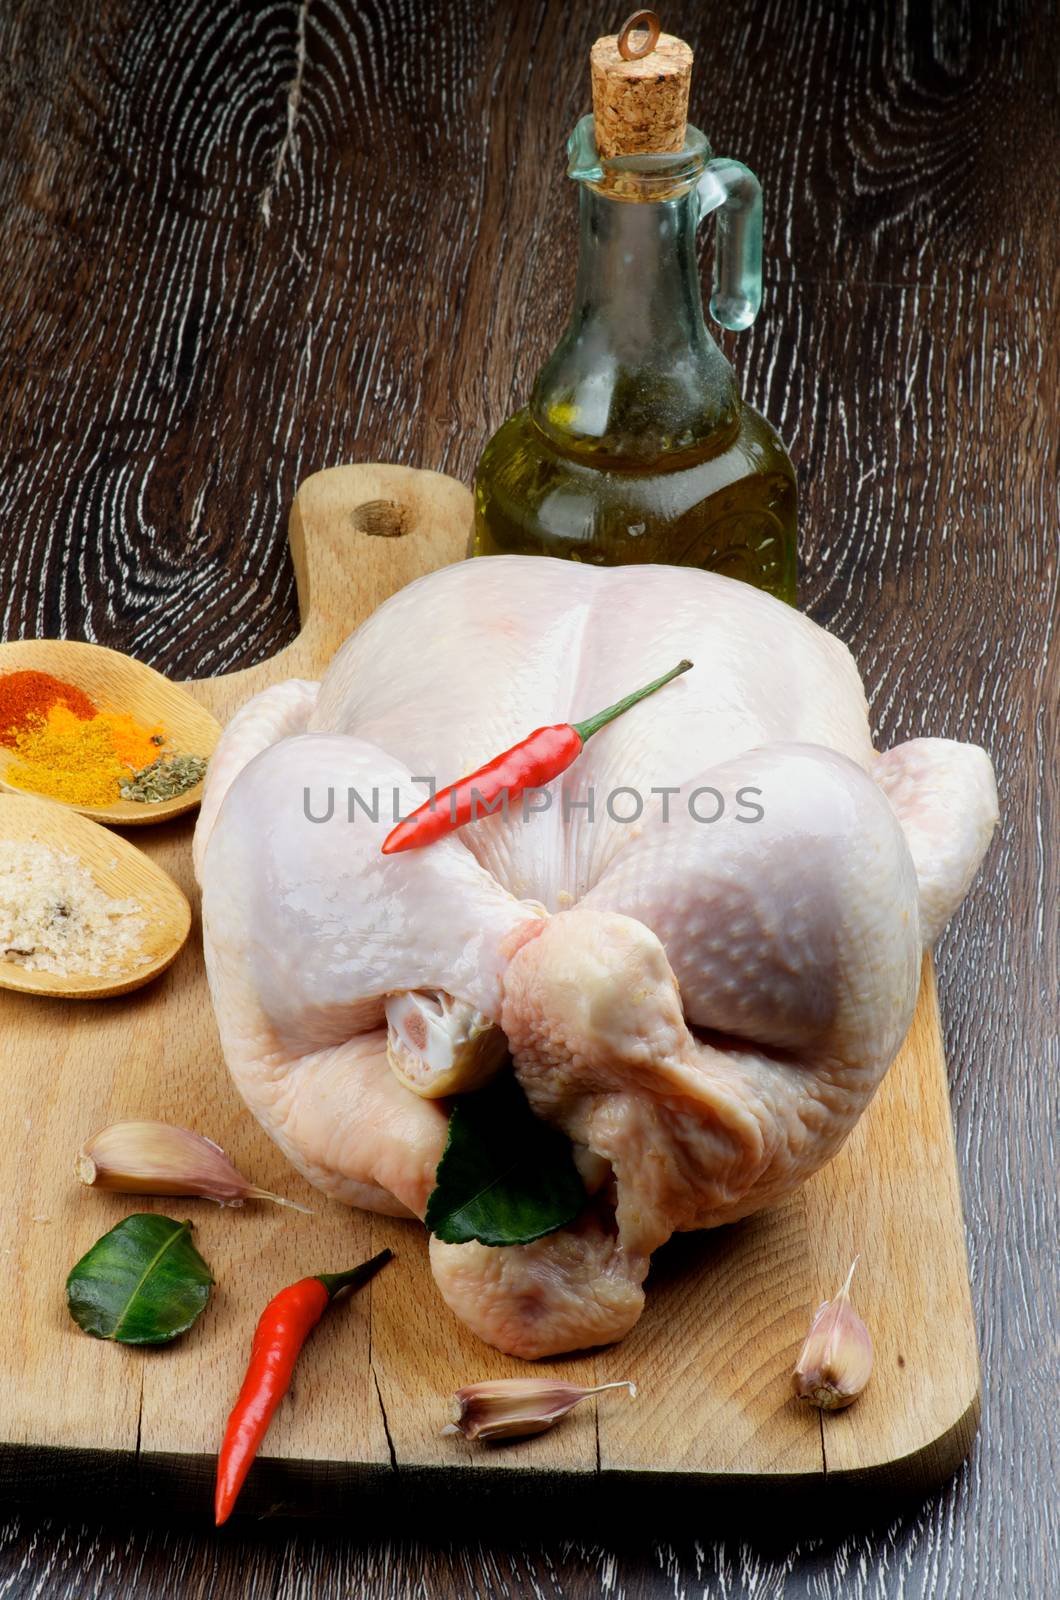 Perfect Raw Chicken Full Body Trussed and Ready to Roast with Hot Crushed Spices, Chili Peppers, Garlic, Curry Leaves and Olive Oil closeup on Wooden Cutting Board